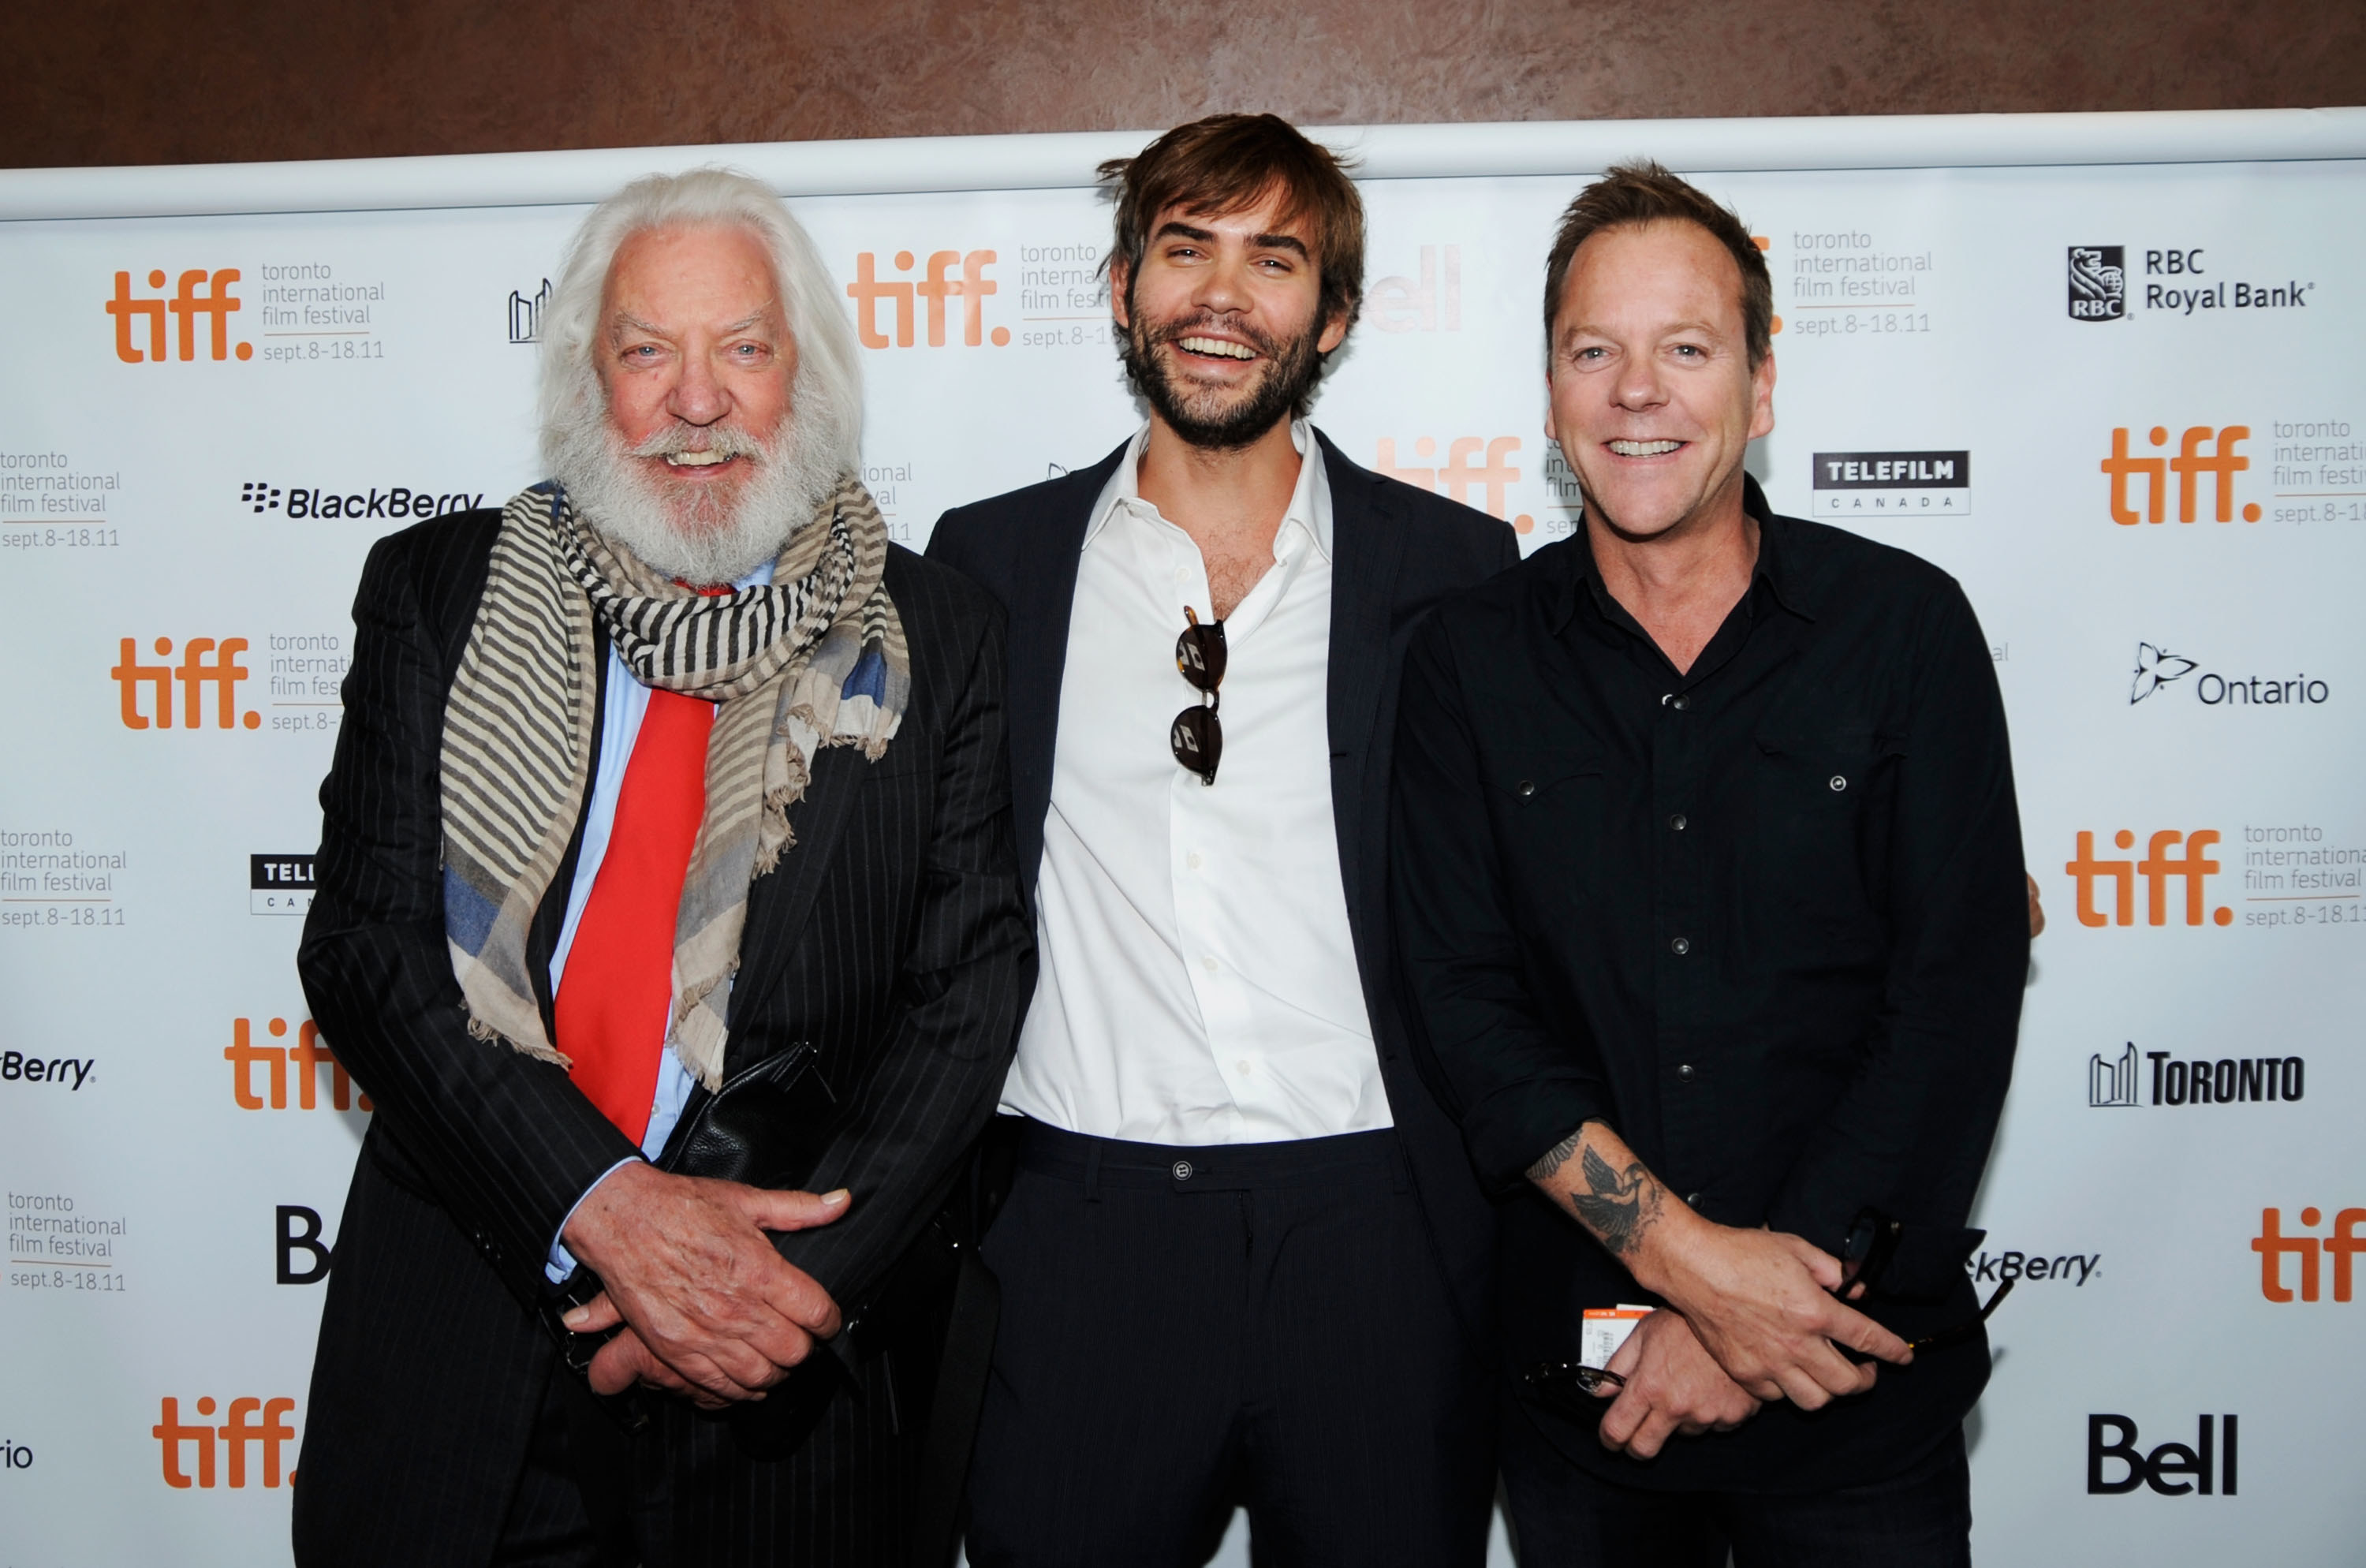 Donald Sutherland, Rossif Sutherland, and Kiefer Sutherland at a premiere